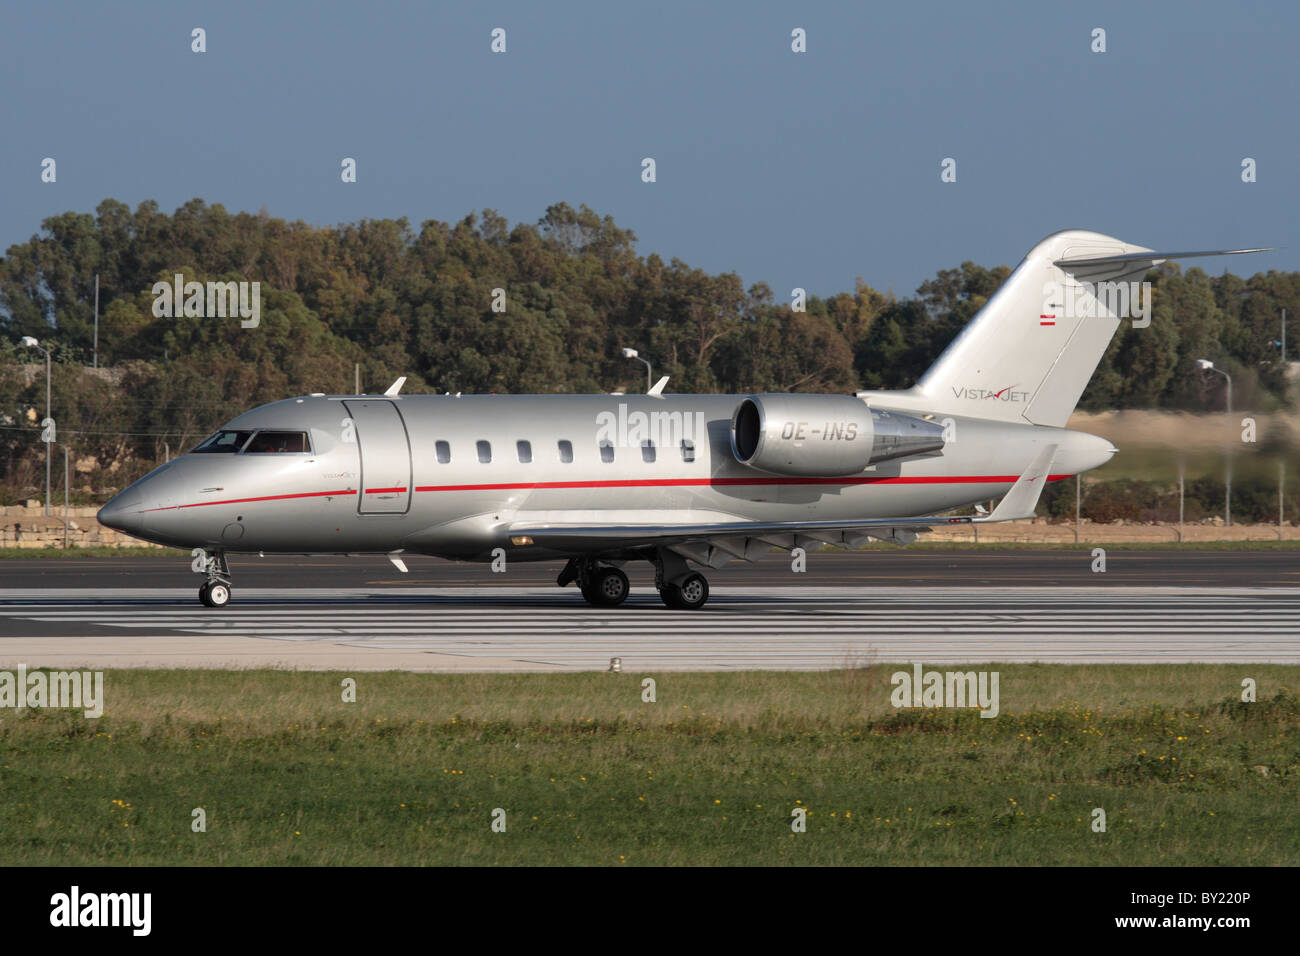 Bombardier Challenger 605 executive jet operated by VistaJet on the runway ready for takeoff from Malta Stock Photo